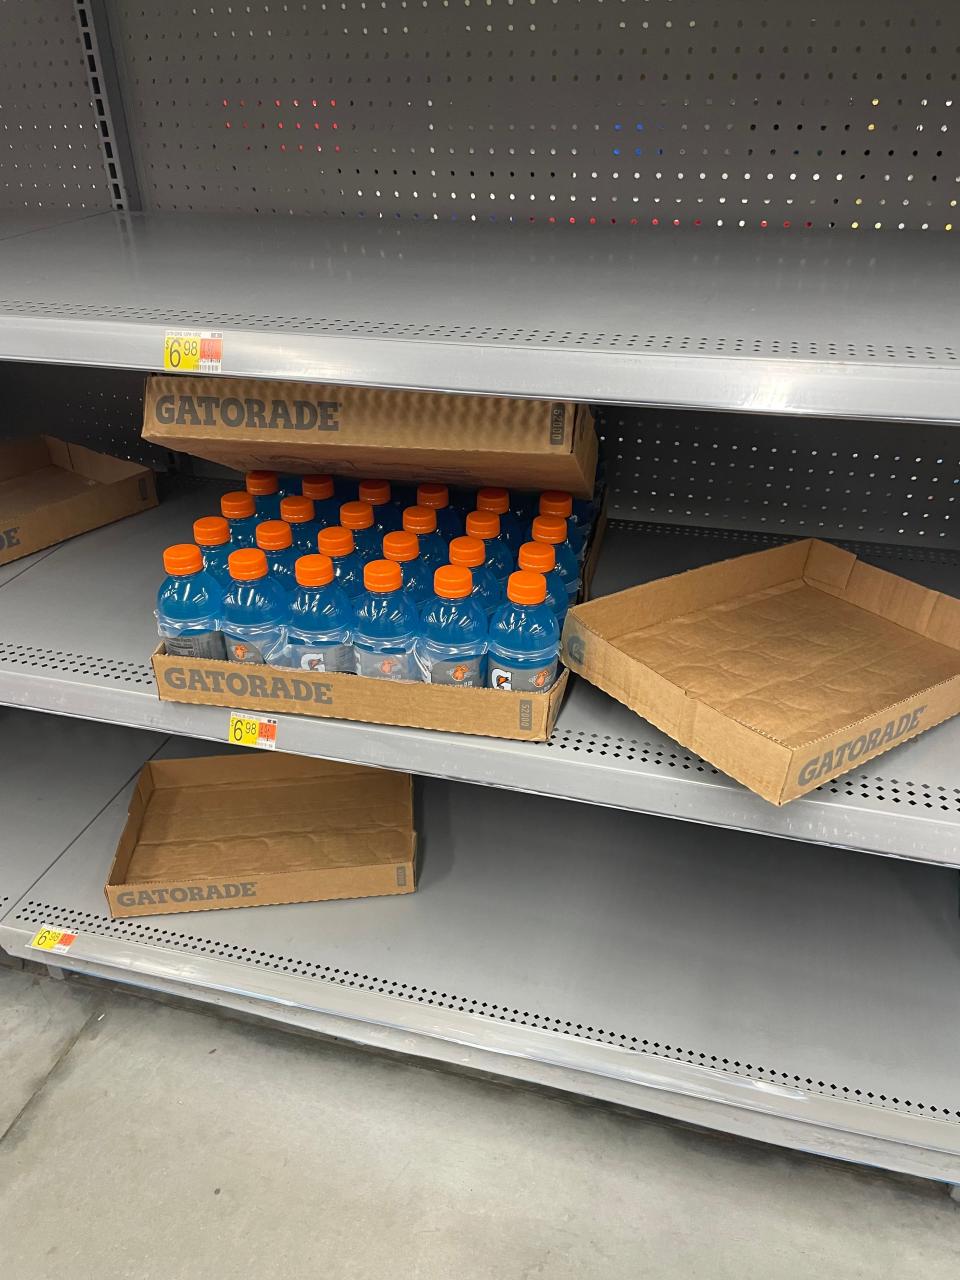 Augusta grocery store shelves are dwindling as shoppers prepare for Hurricane Ian.